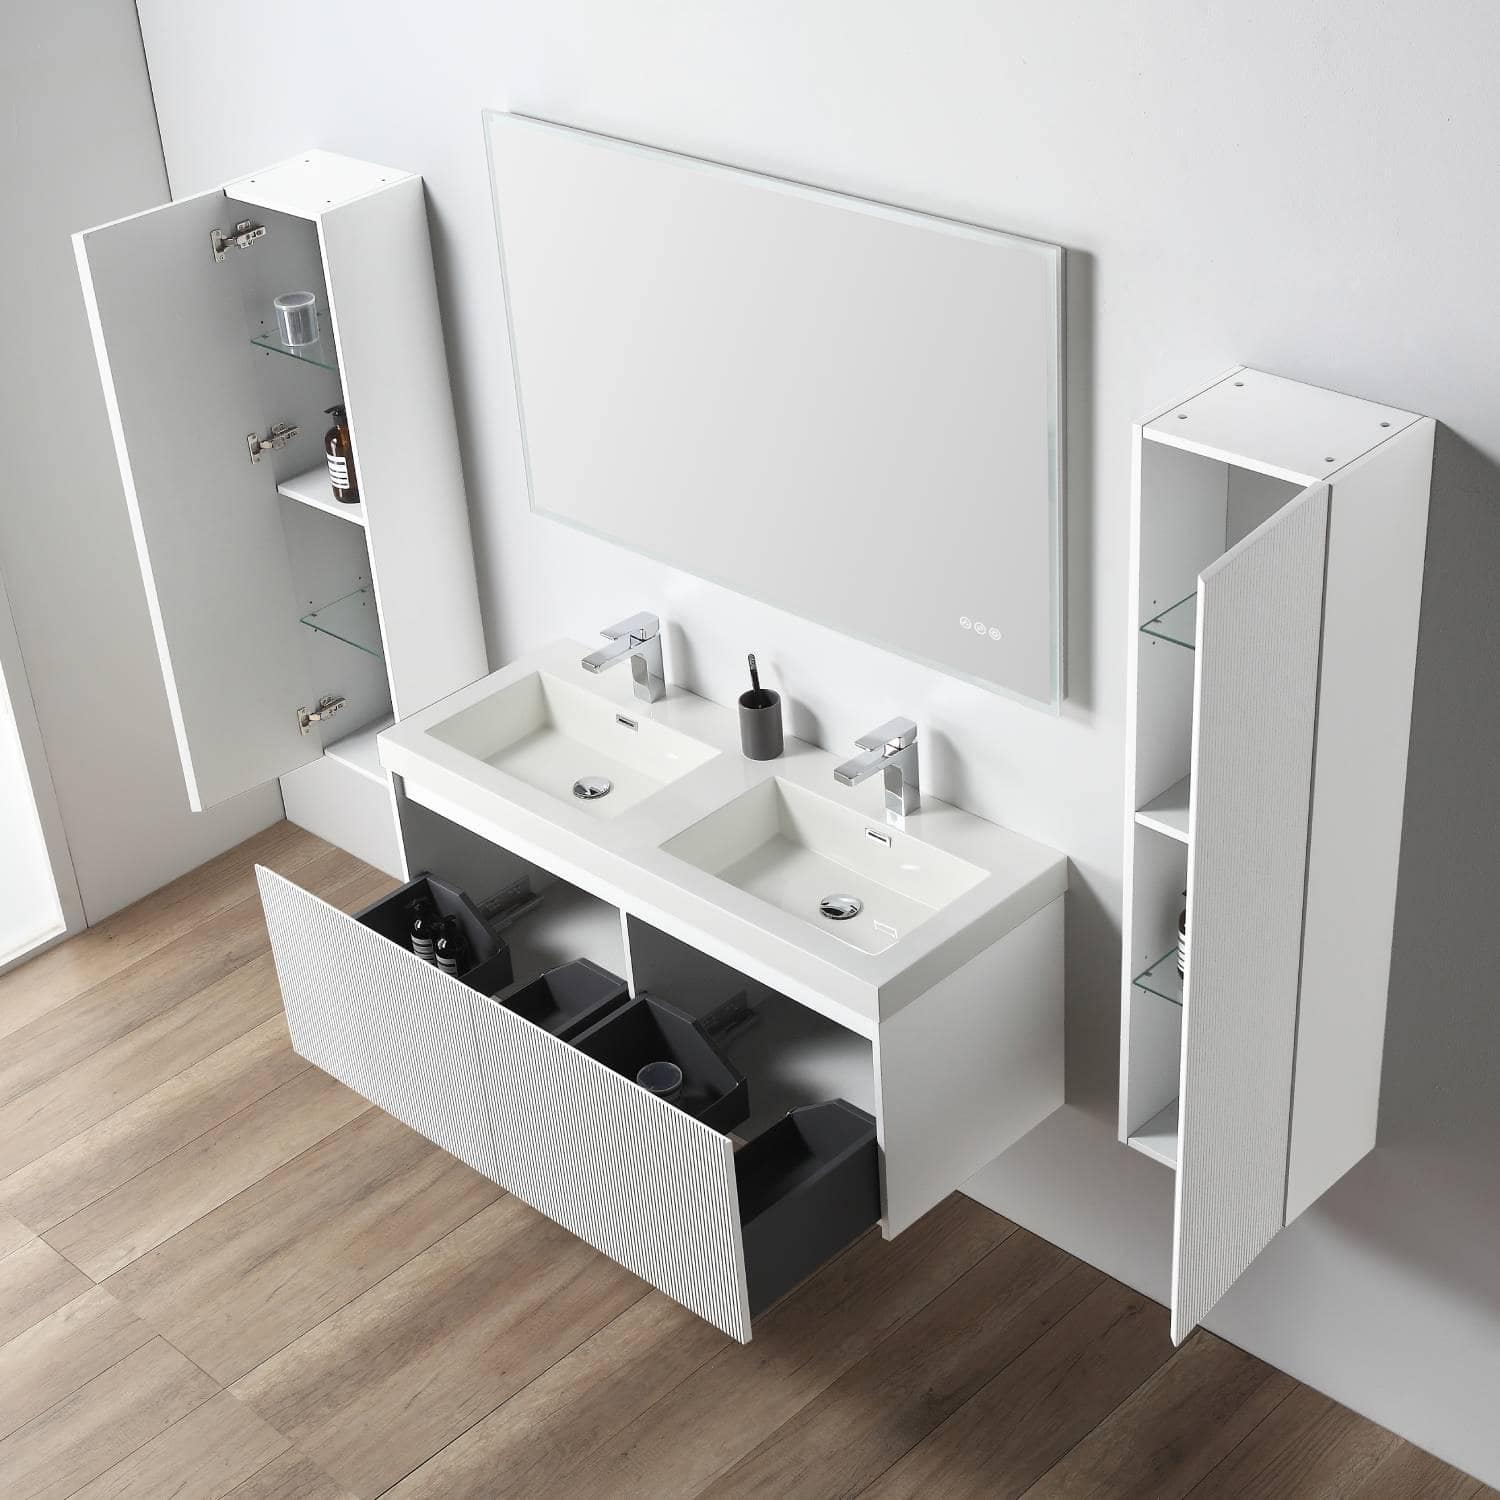 Plywood contemporary bathroom vanities are water resistant and easy to install.